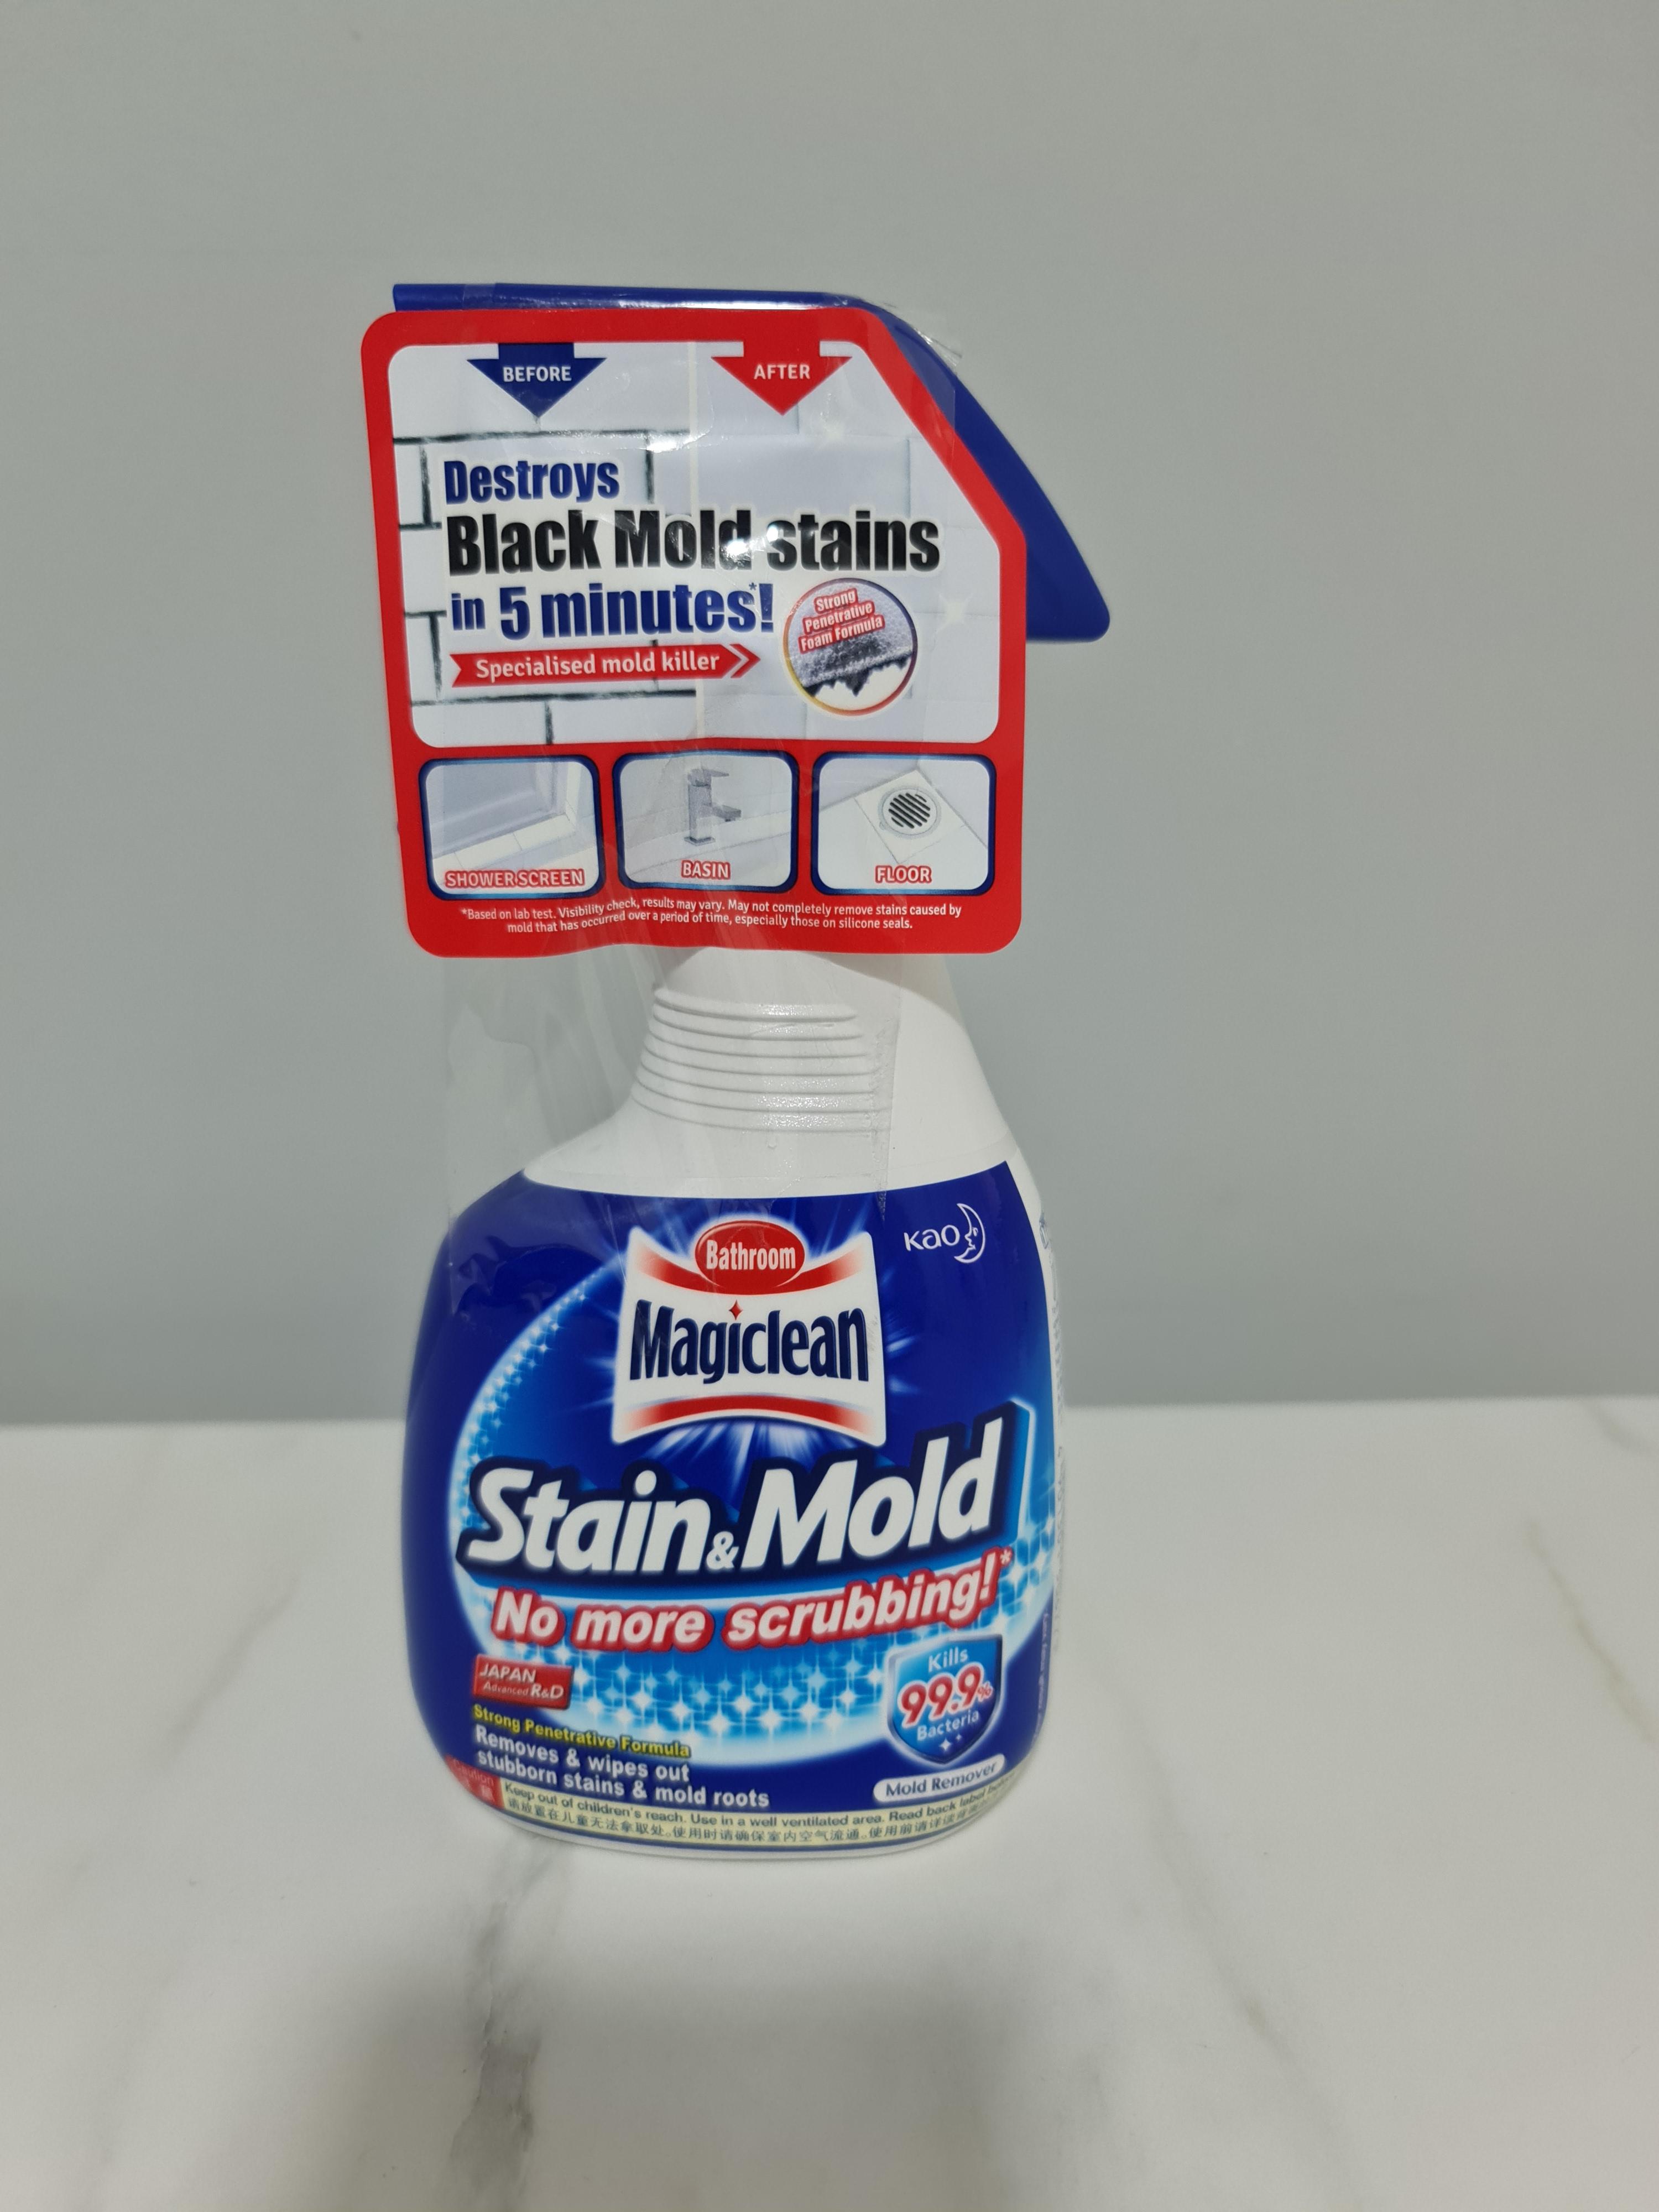 Mold and magiclean stain How effective